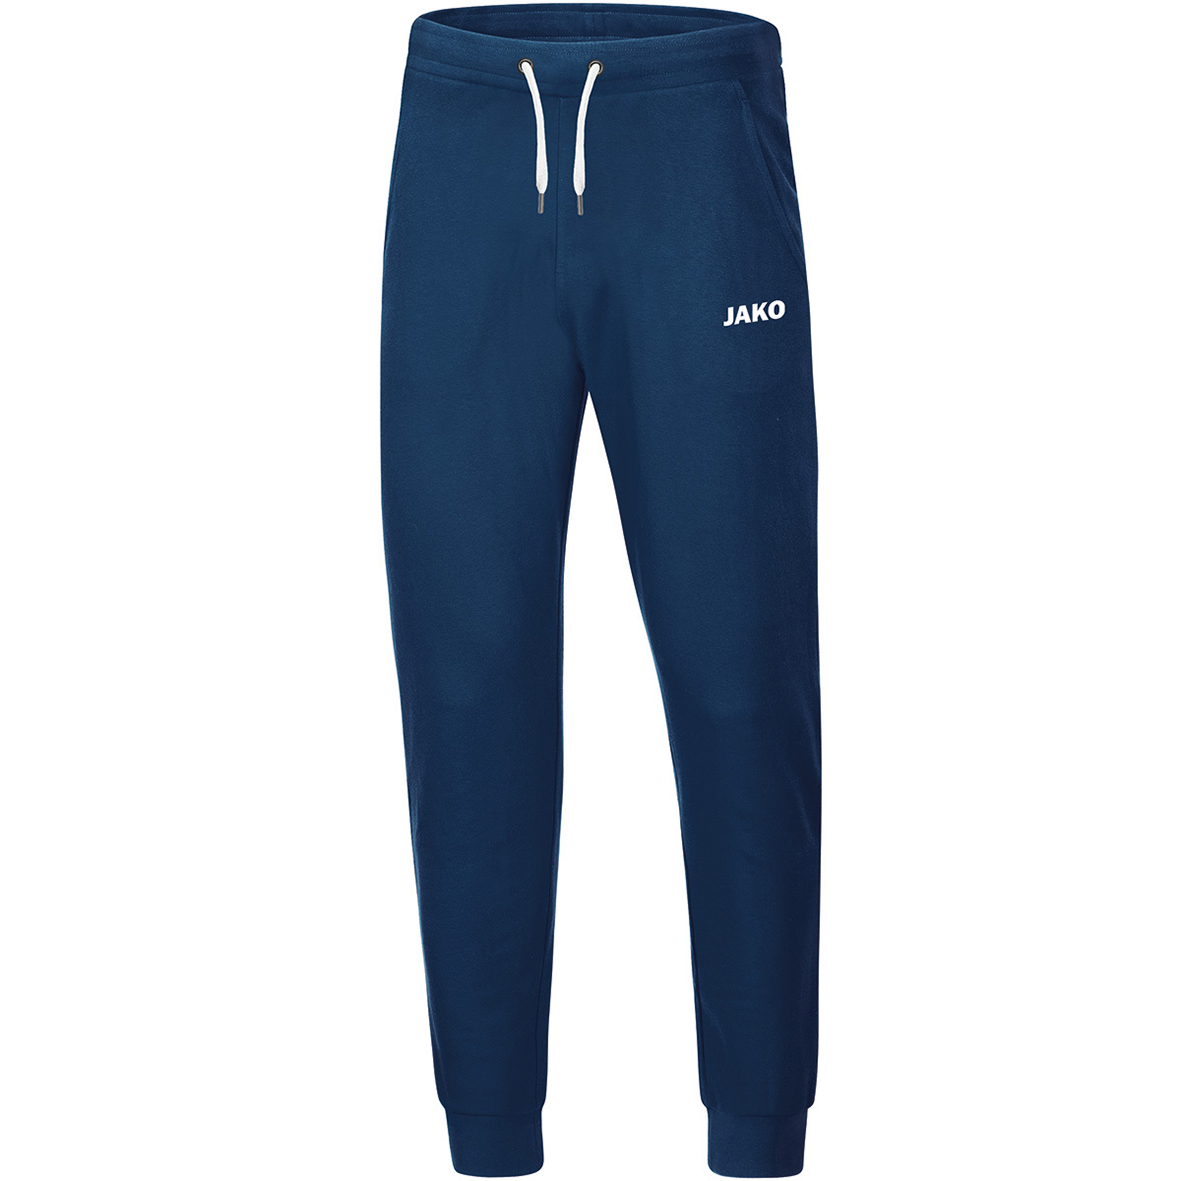  JOGGING TROUSERS JAKO BASE WITH CUFFS, SEABLUE MEN.